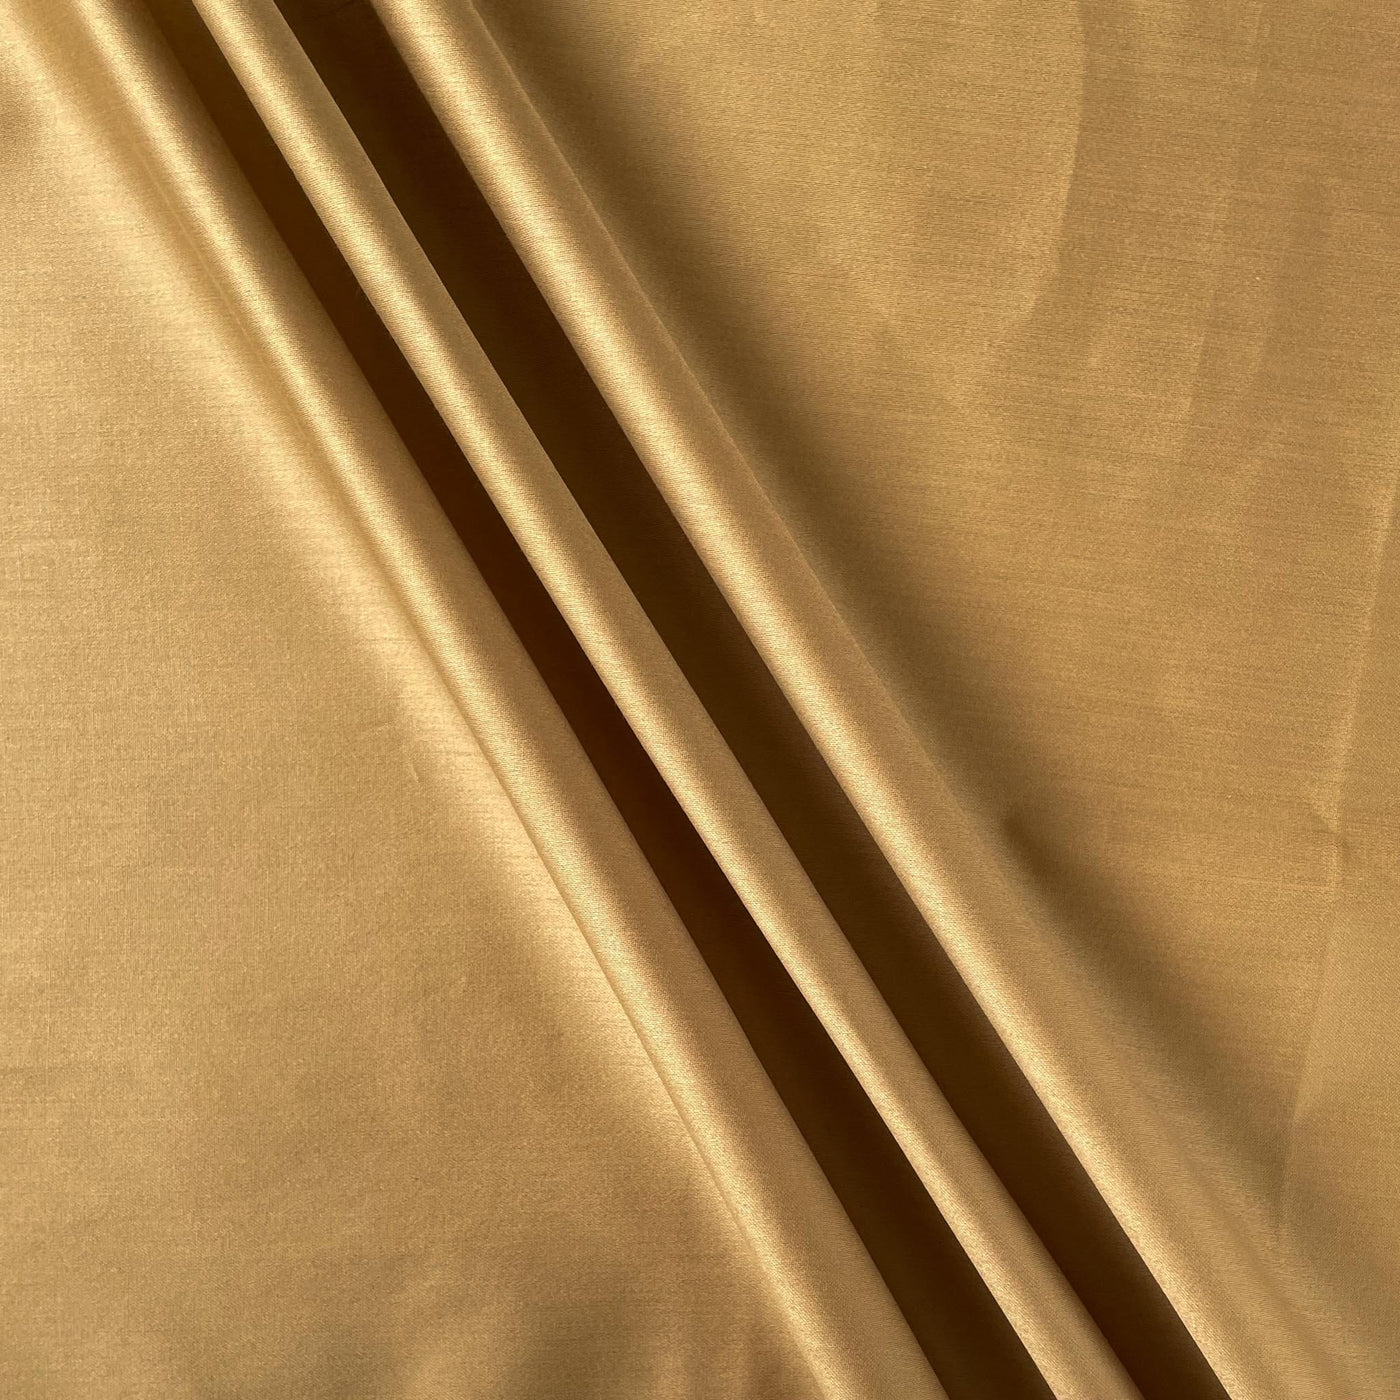 Fabric Pandit Fabric Dusty Brown Plain Cotton Satin Fabric (Width 42 Inches)